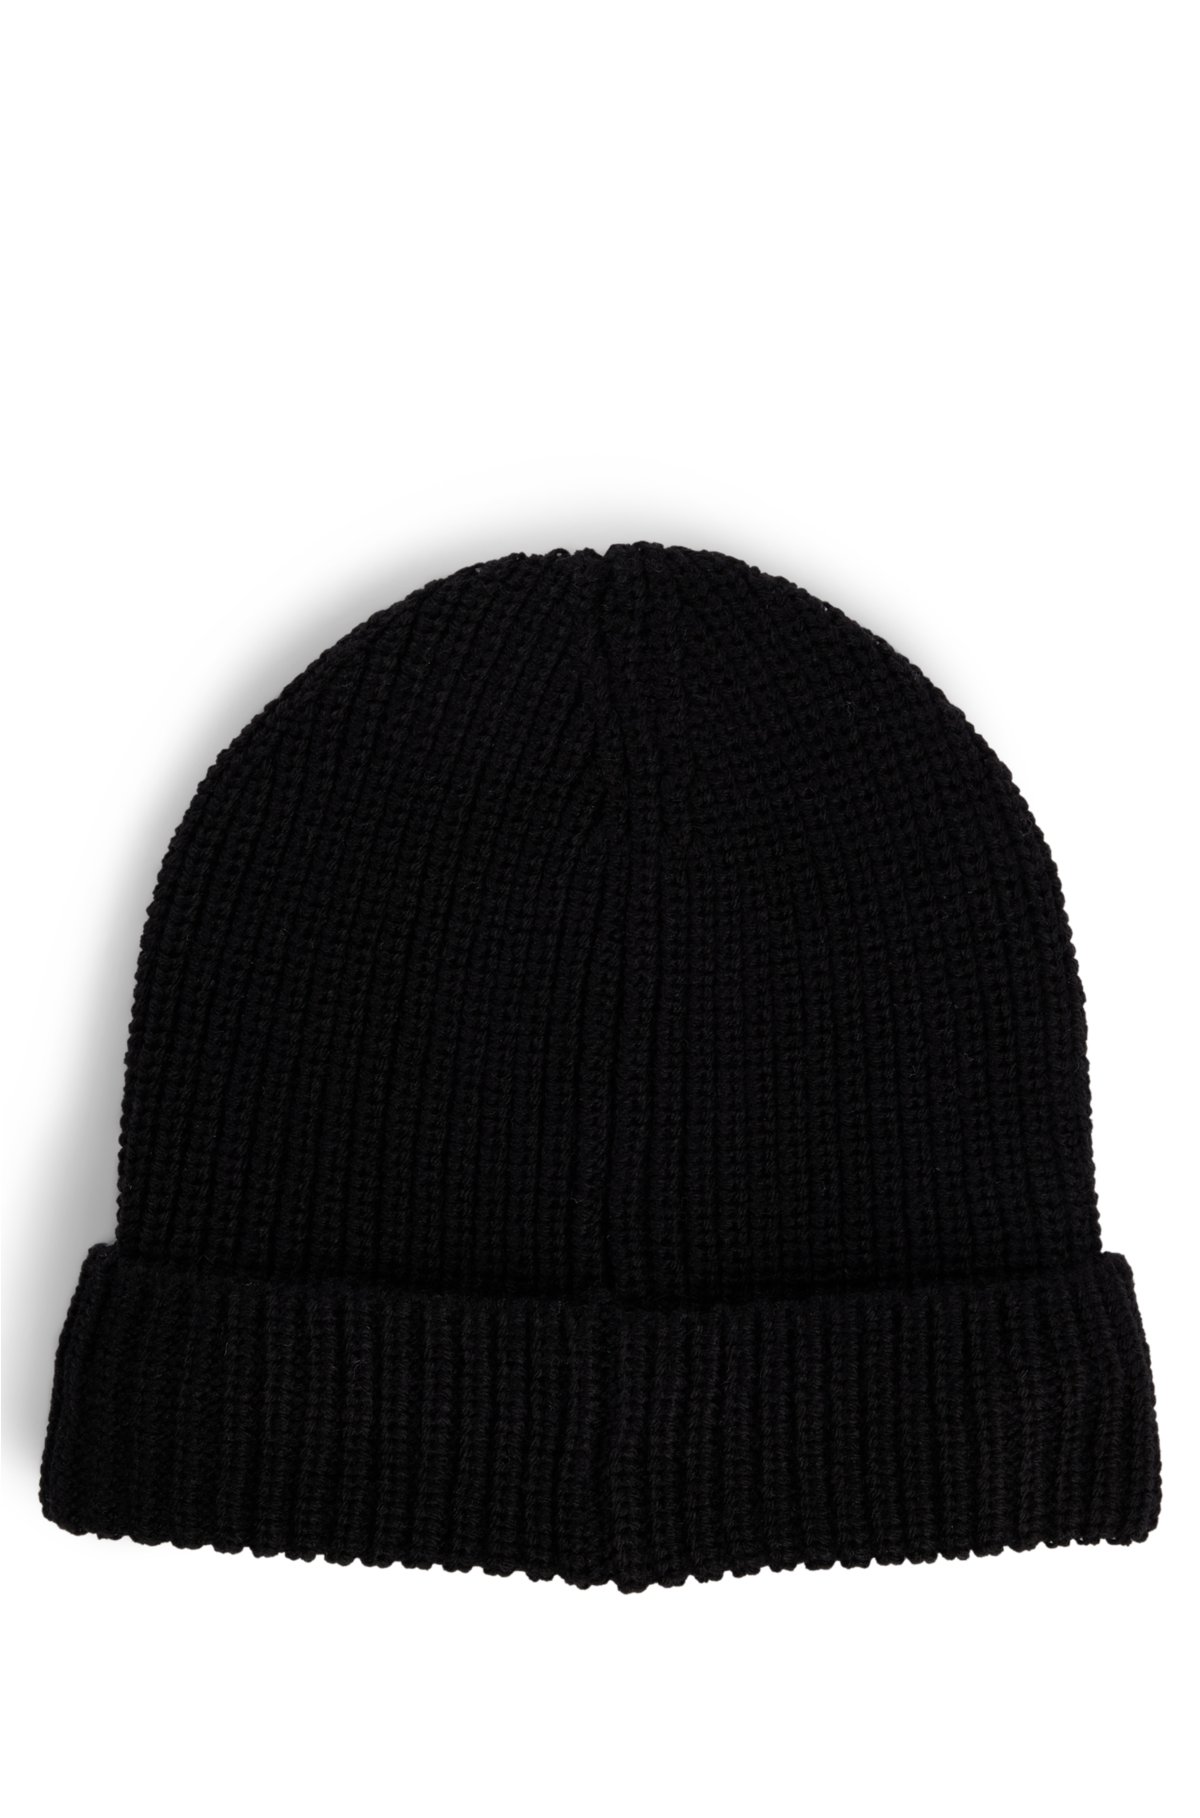 Kids' beanie hat with pompom and jacquard-woven logo, Black